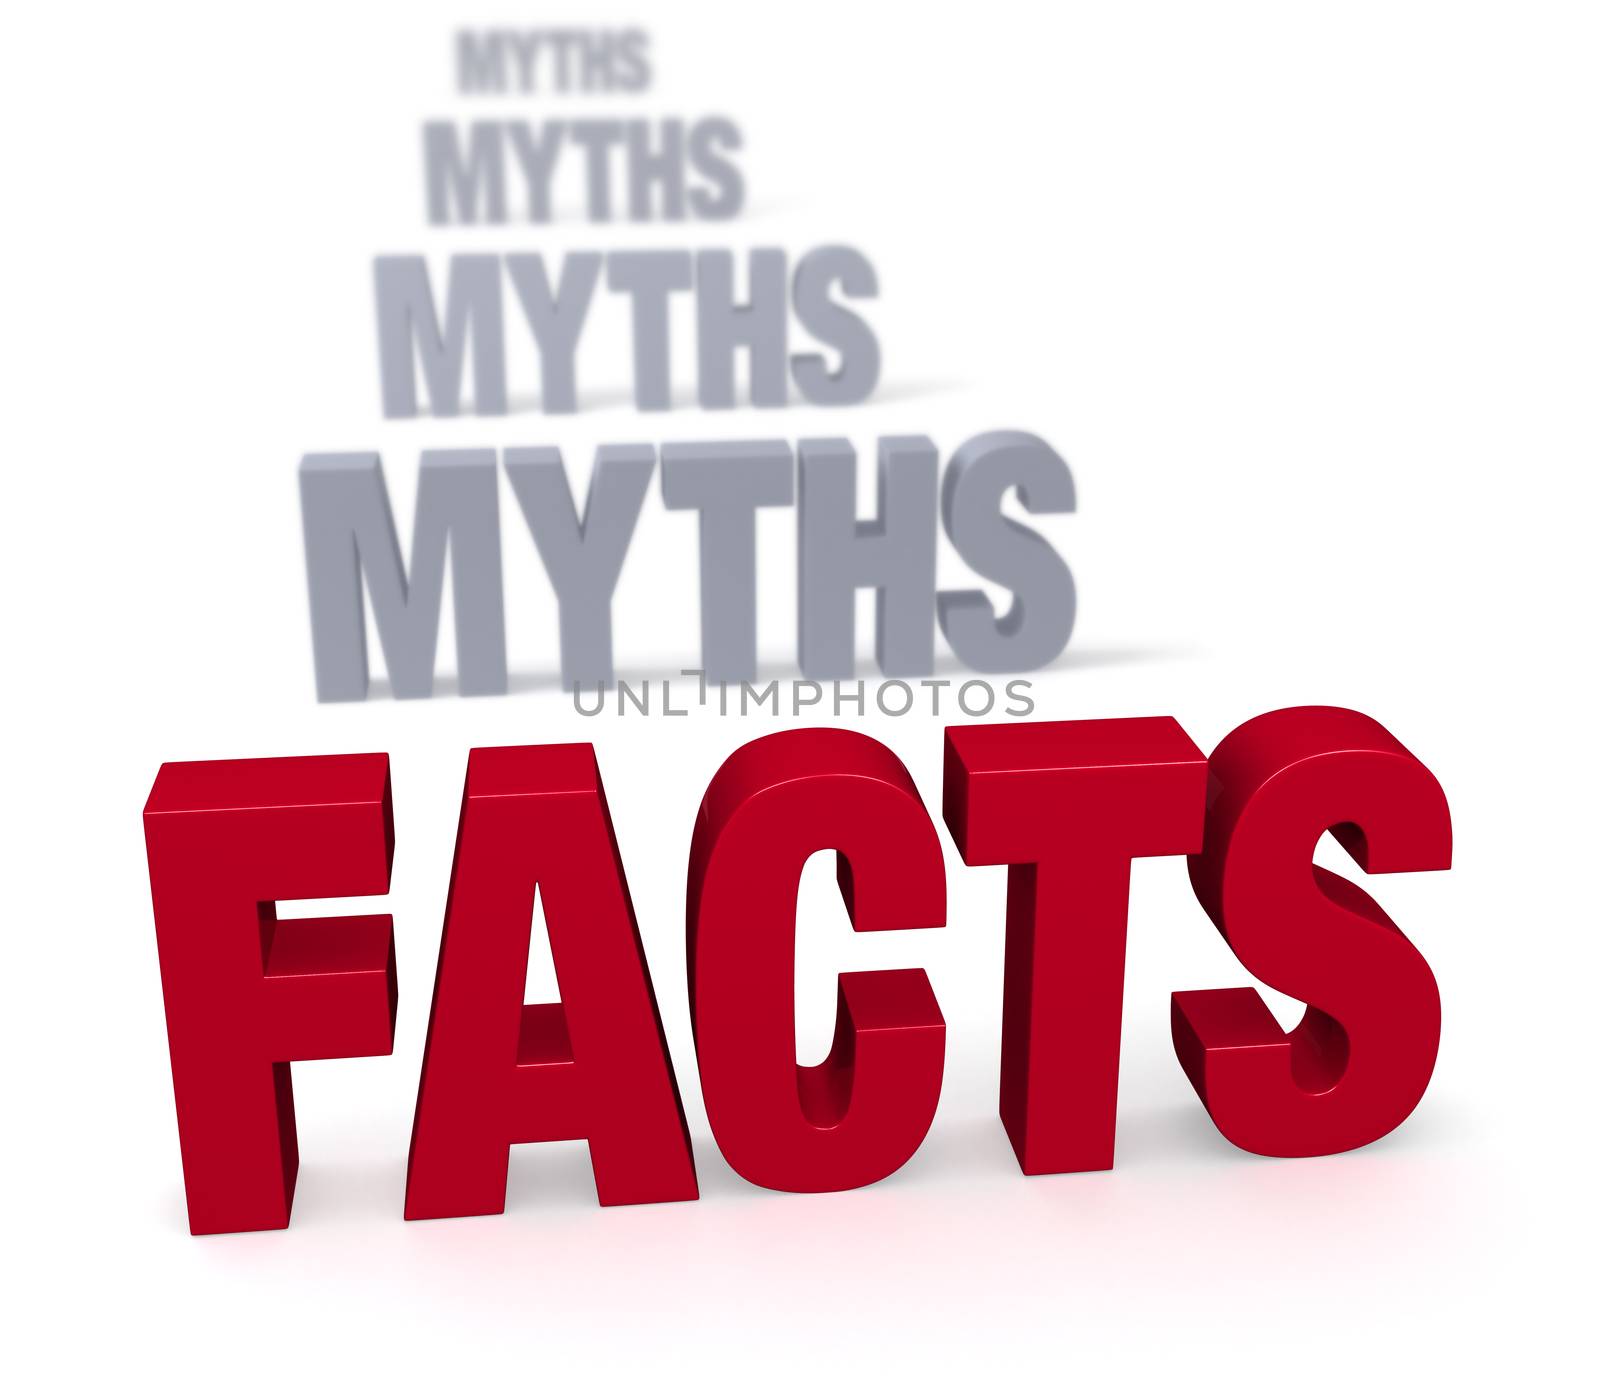 Sharp focus on large, shiny red "FACTS" in front of a row of plain, gray "MYTHS" blurring and receding into the distance.  Isolated on white.